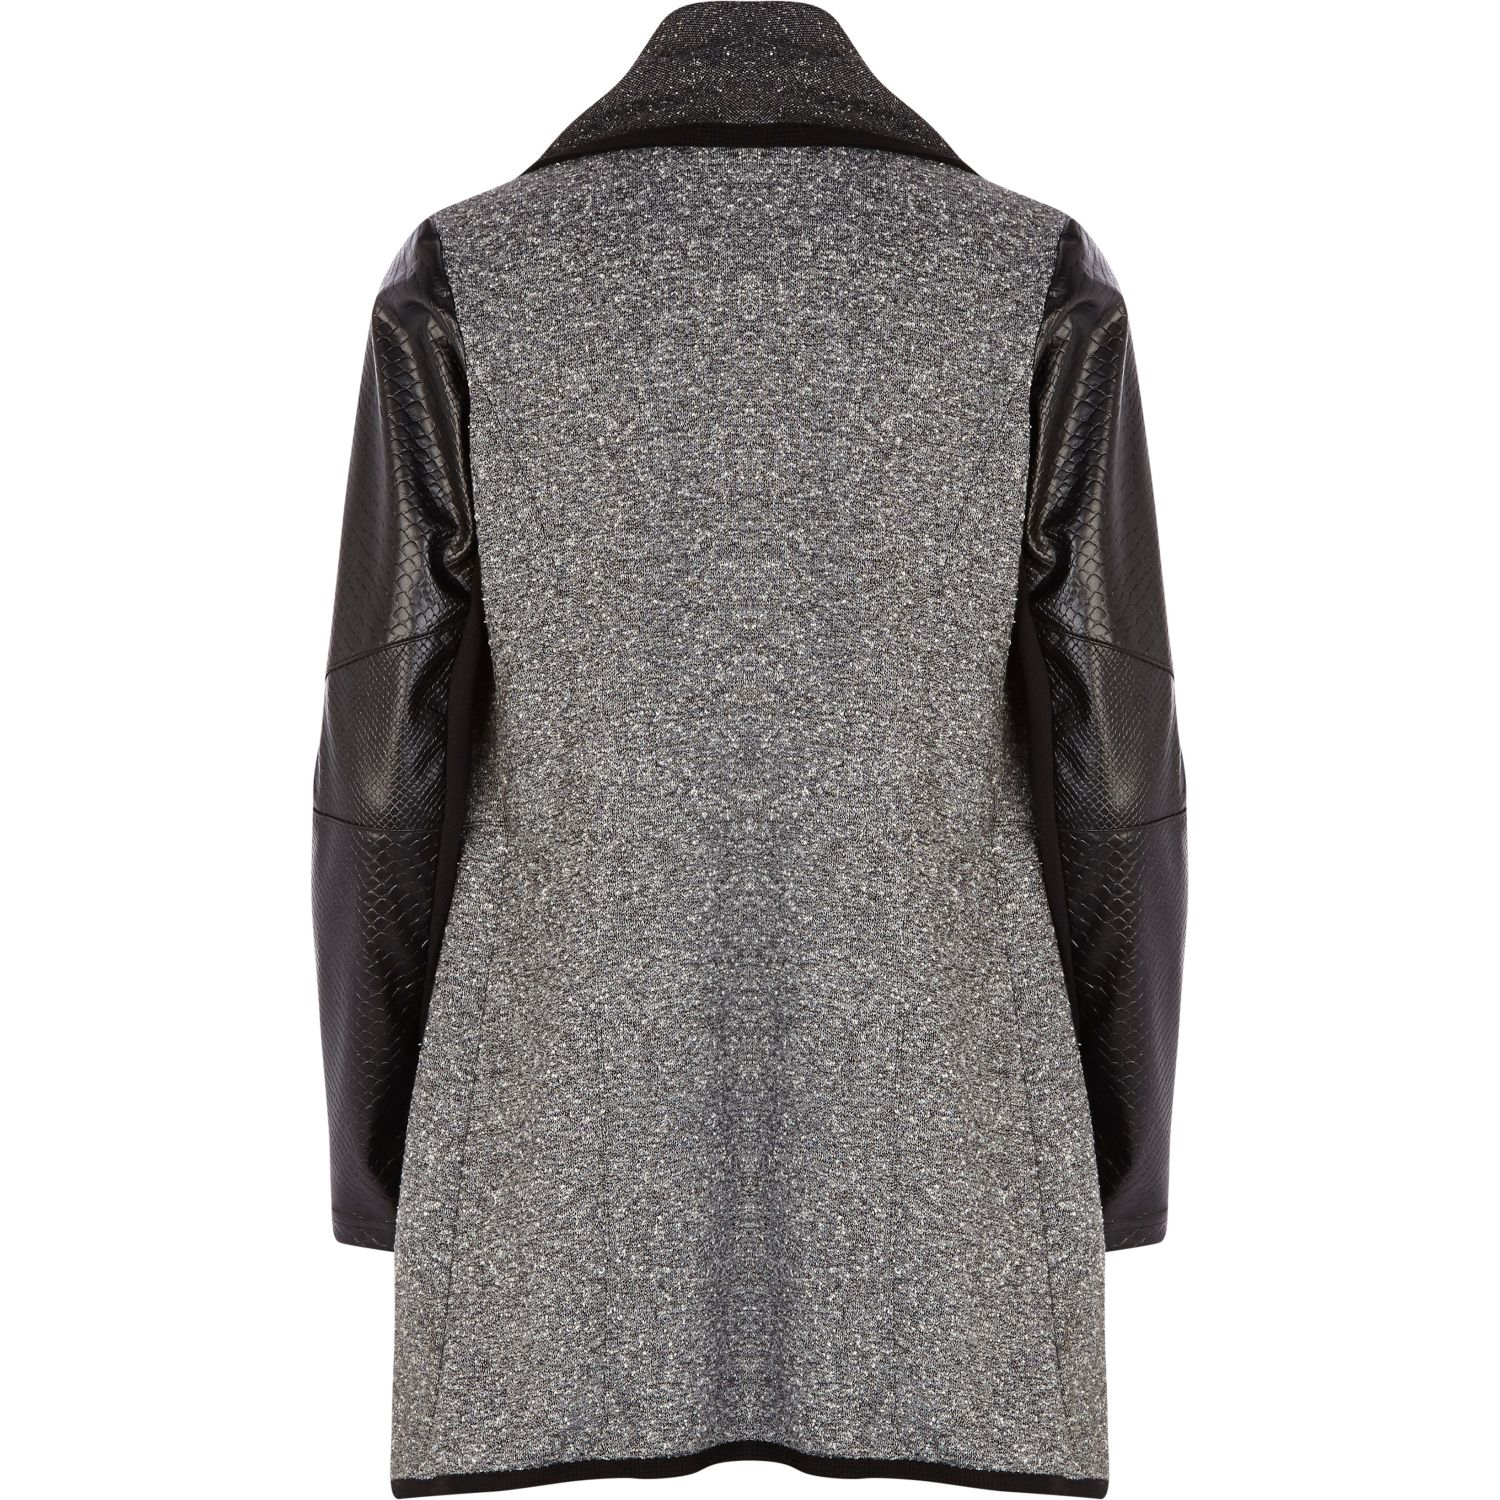 River island Boucle Contrast Sleeve Waterfall Jacket in Gray (Grey) | Lyst